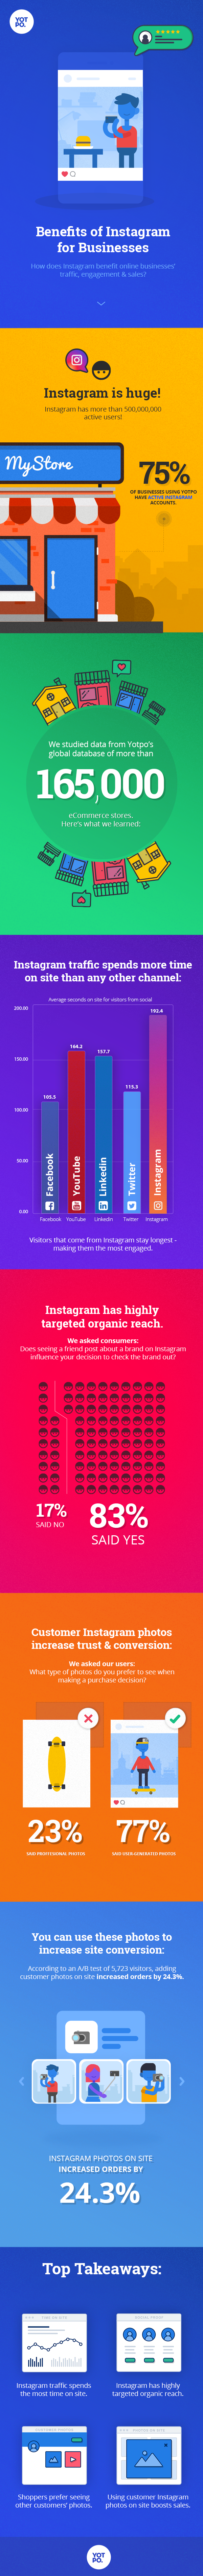 How to Sell on Instagram: 5 Data-Driven Tips for Success